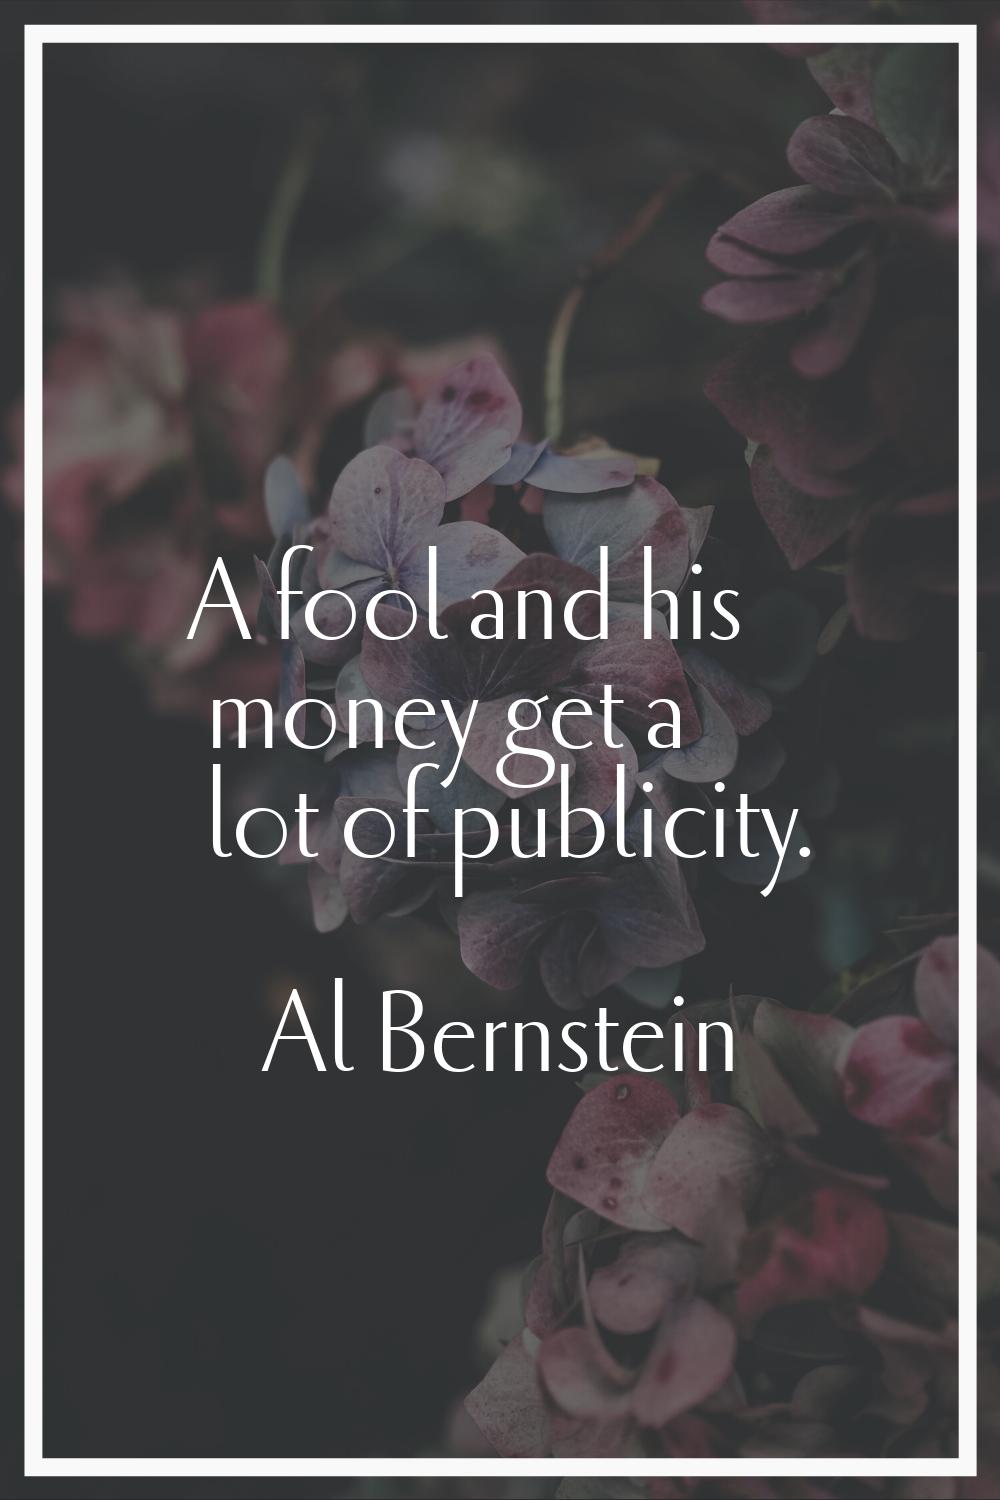 A fool and his money get a lot of publicity.